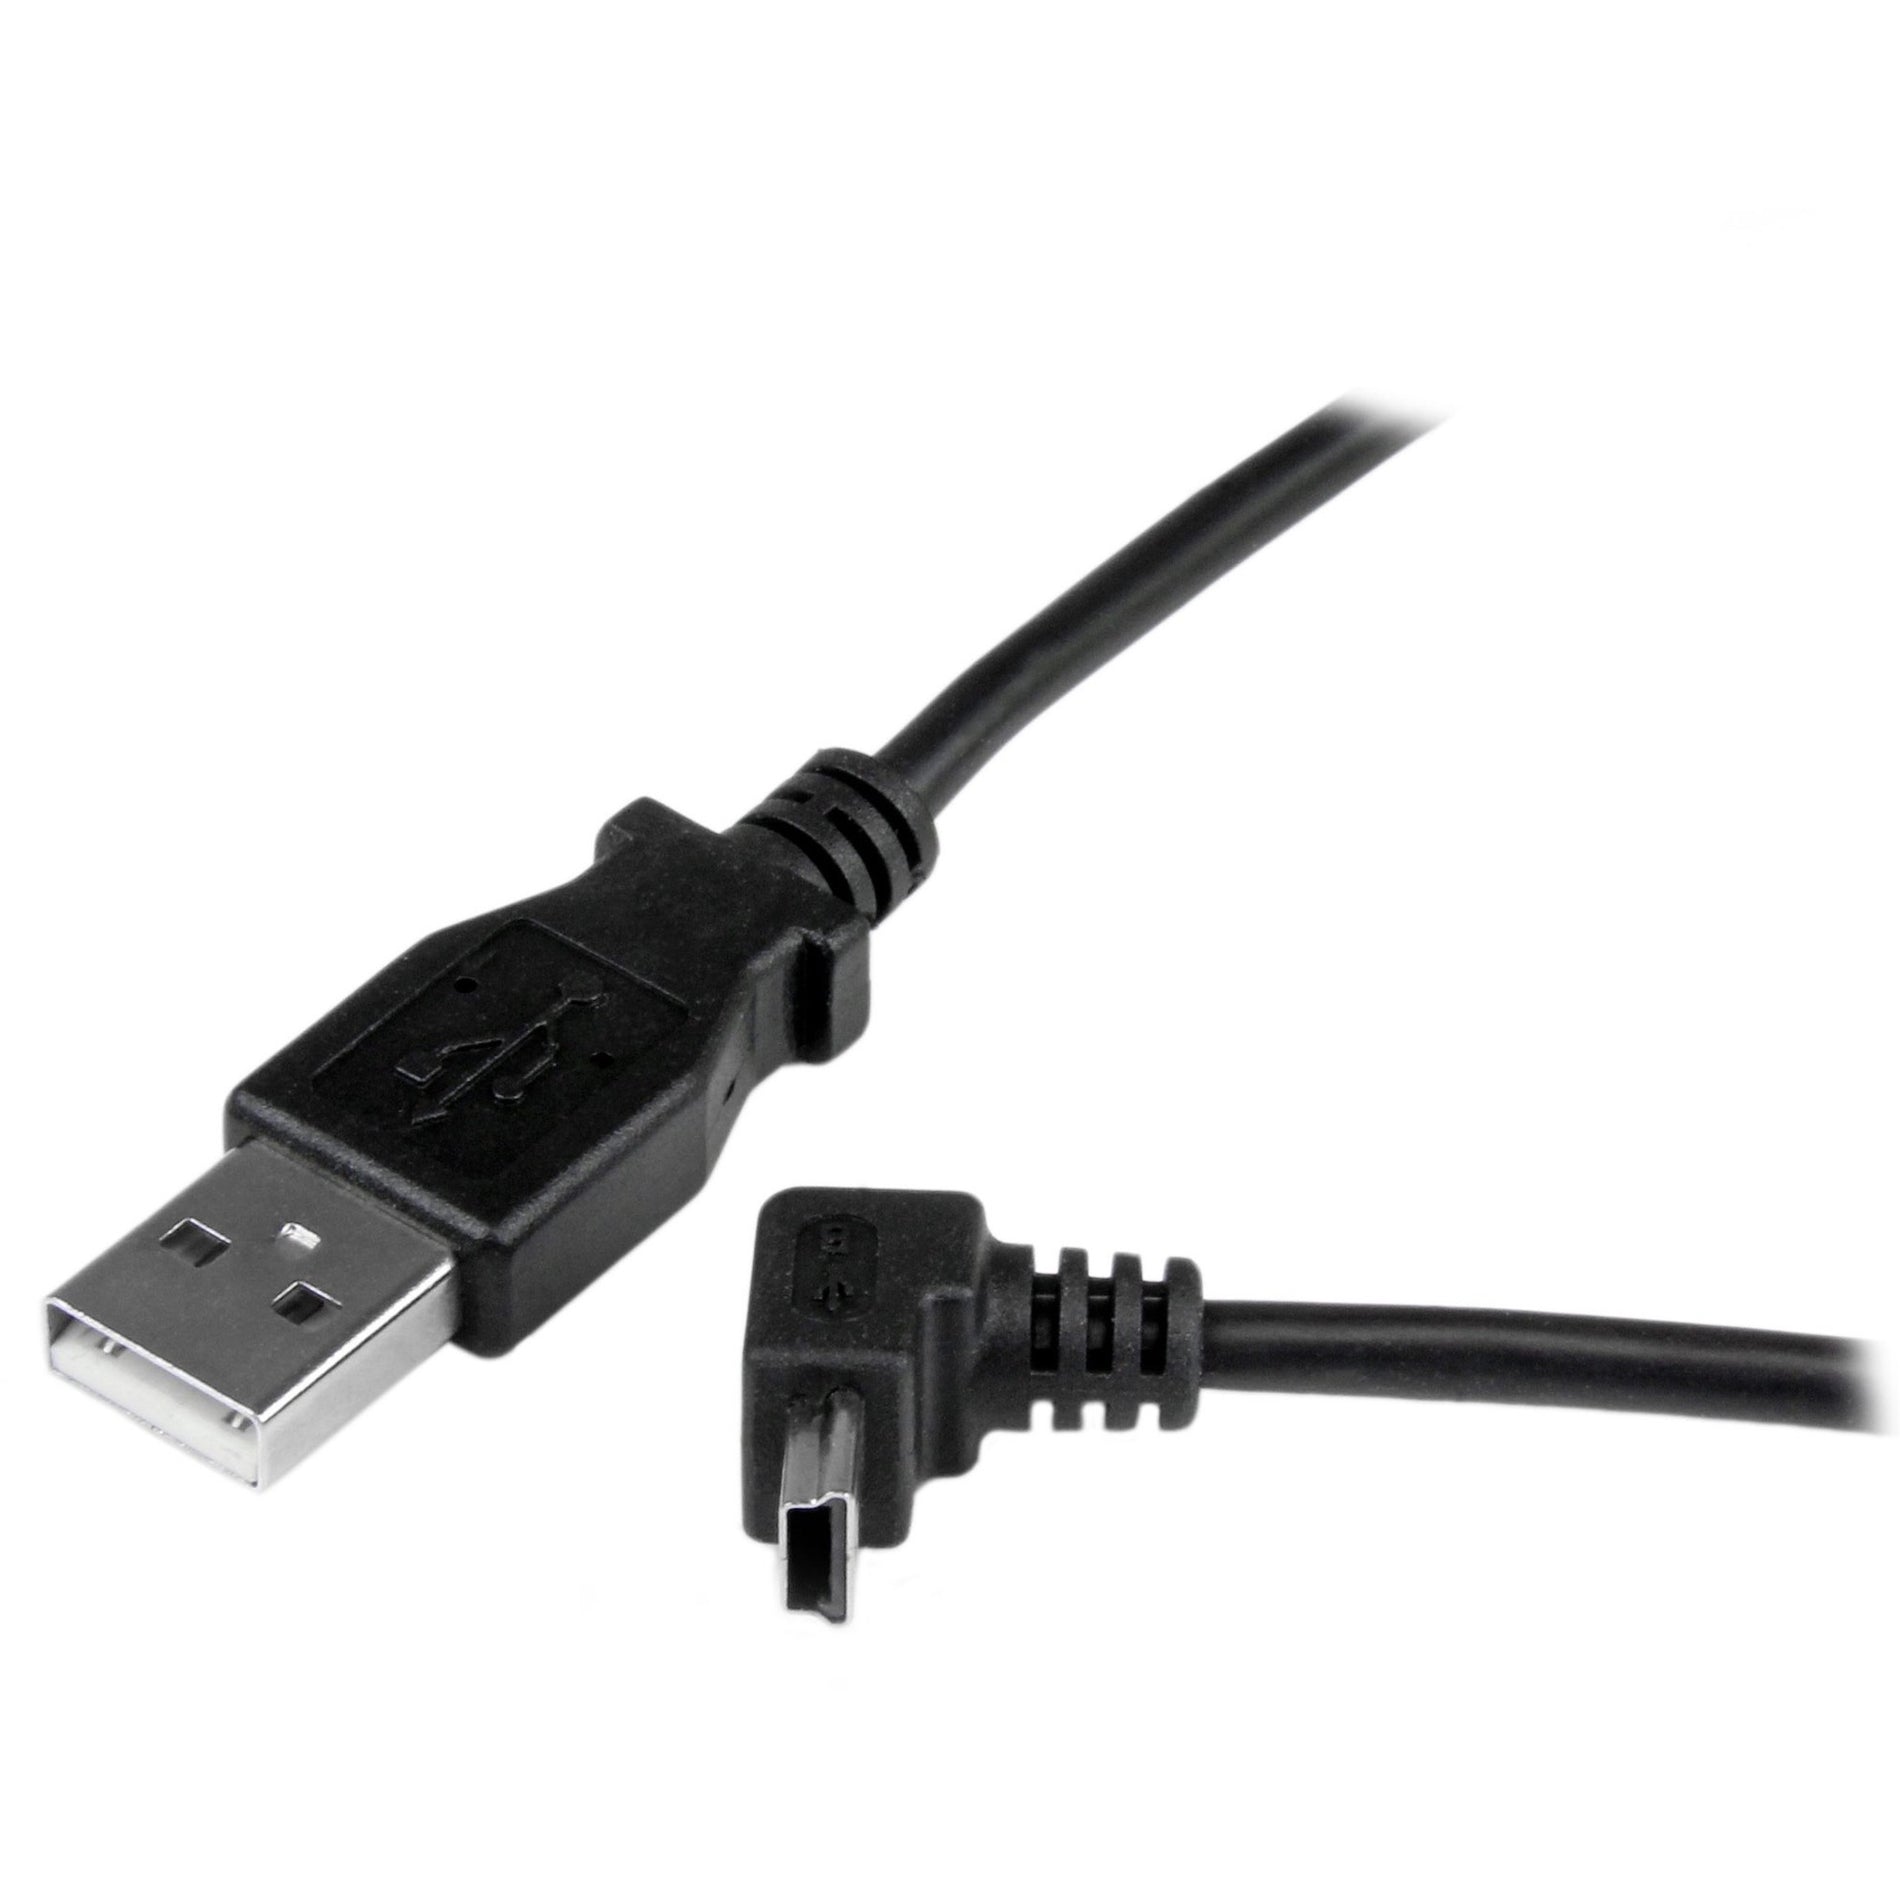 StarTech.com USBAMB1MU 1m Mini USB Cable - A to Up Angle Mini B, Data Transfer Cable, 3.28 ft, Strain Relief, Molded, Black